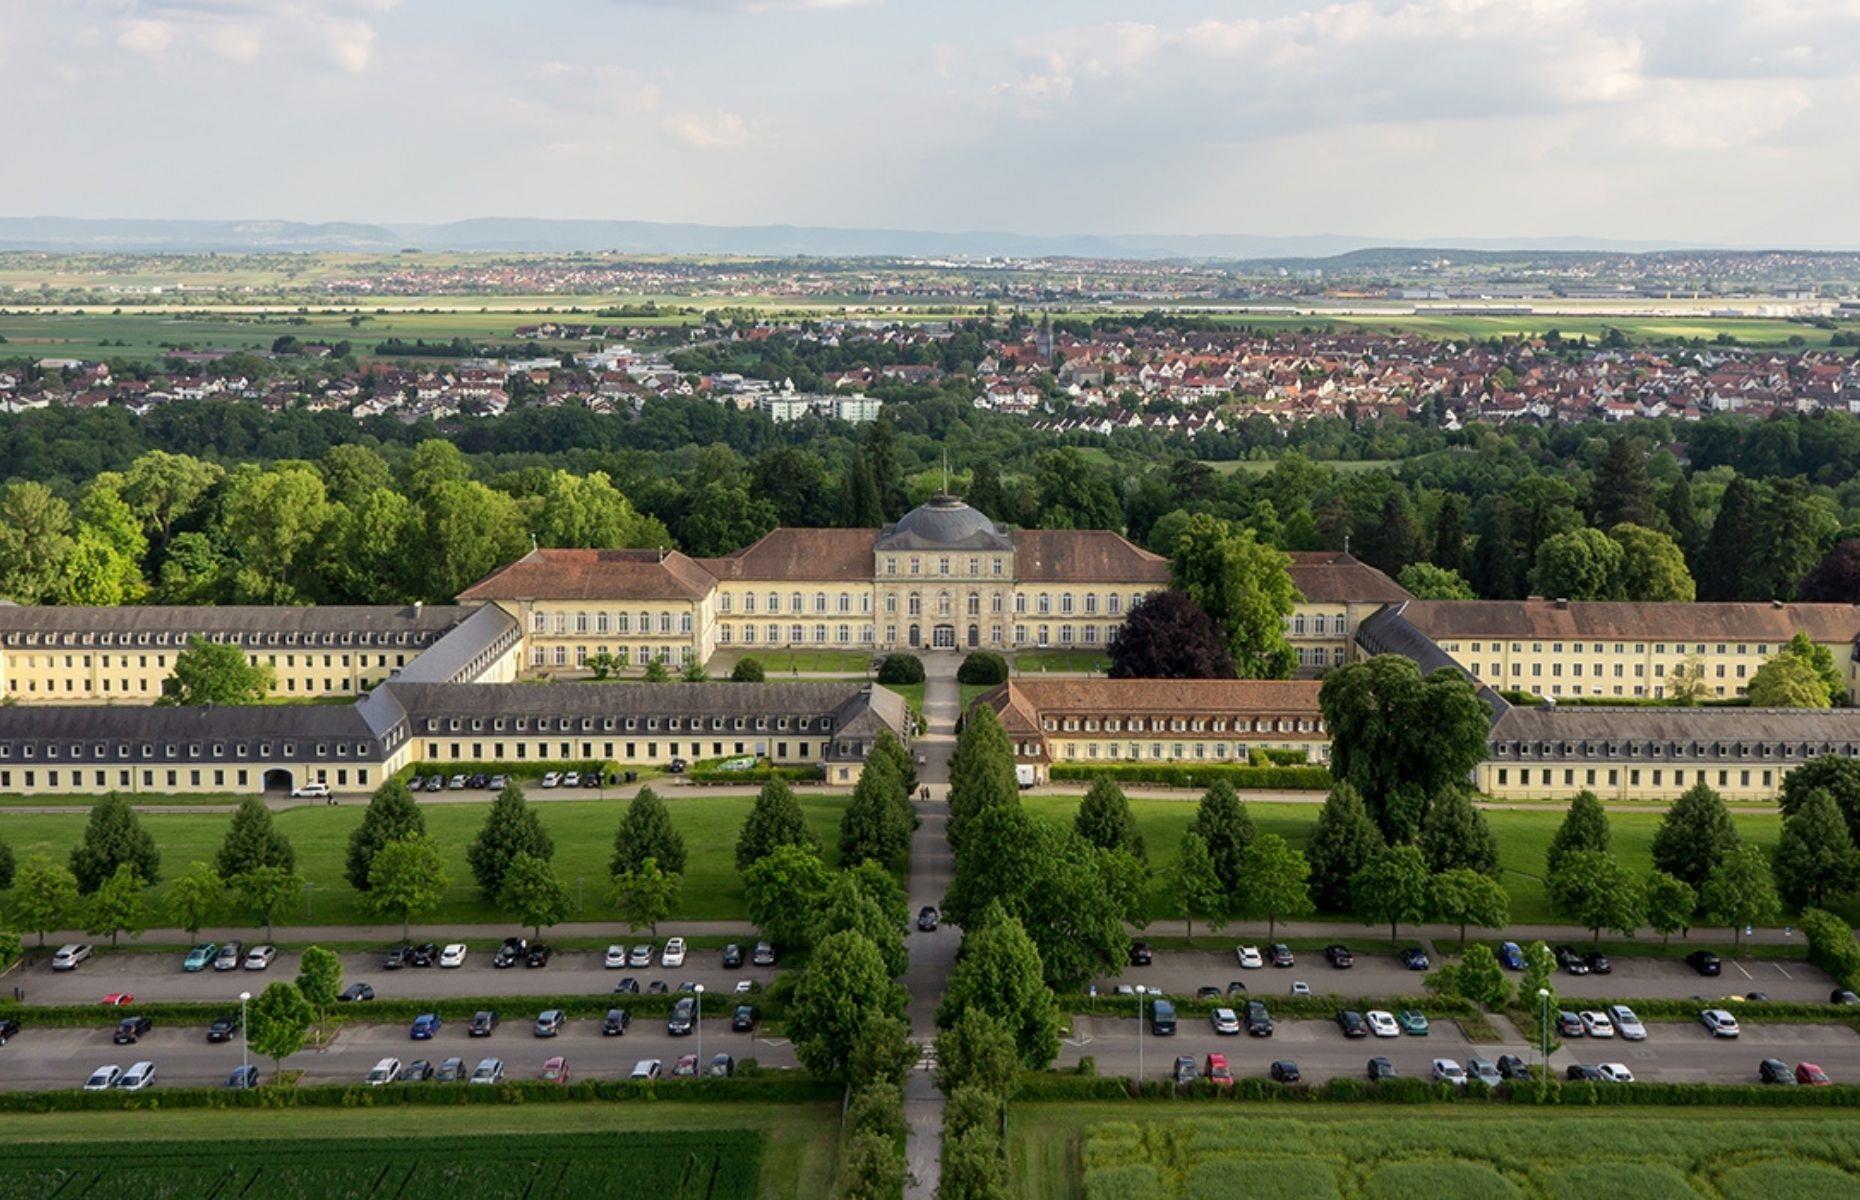 <p>Akin to a noble palace, the <a href="https://www.uni-hohenheim.de/en">University of Hohenheim</a> is located to the south of Stuttgart and dates back to 1818. Awe-inspiring in terms of size and grandeur, the property also has a poignant history. In the 1940s, during the Second World War, around 250 people were deported to Hohenheim for forced labor. Today, a memorial sculpture can be found on university grounds, commemorating those that suffered and lost their lives during the Nazi regime.</p>